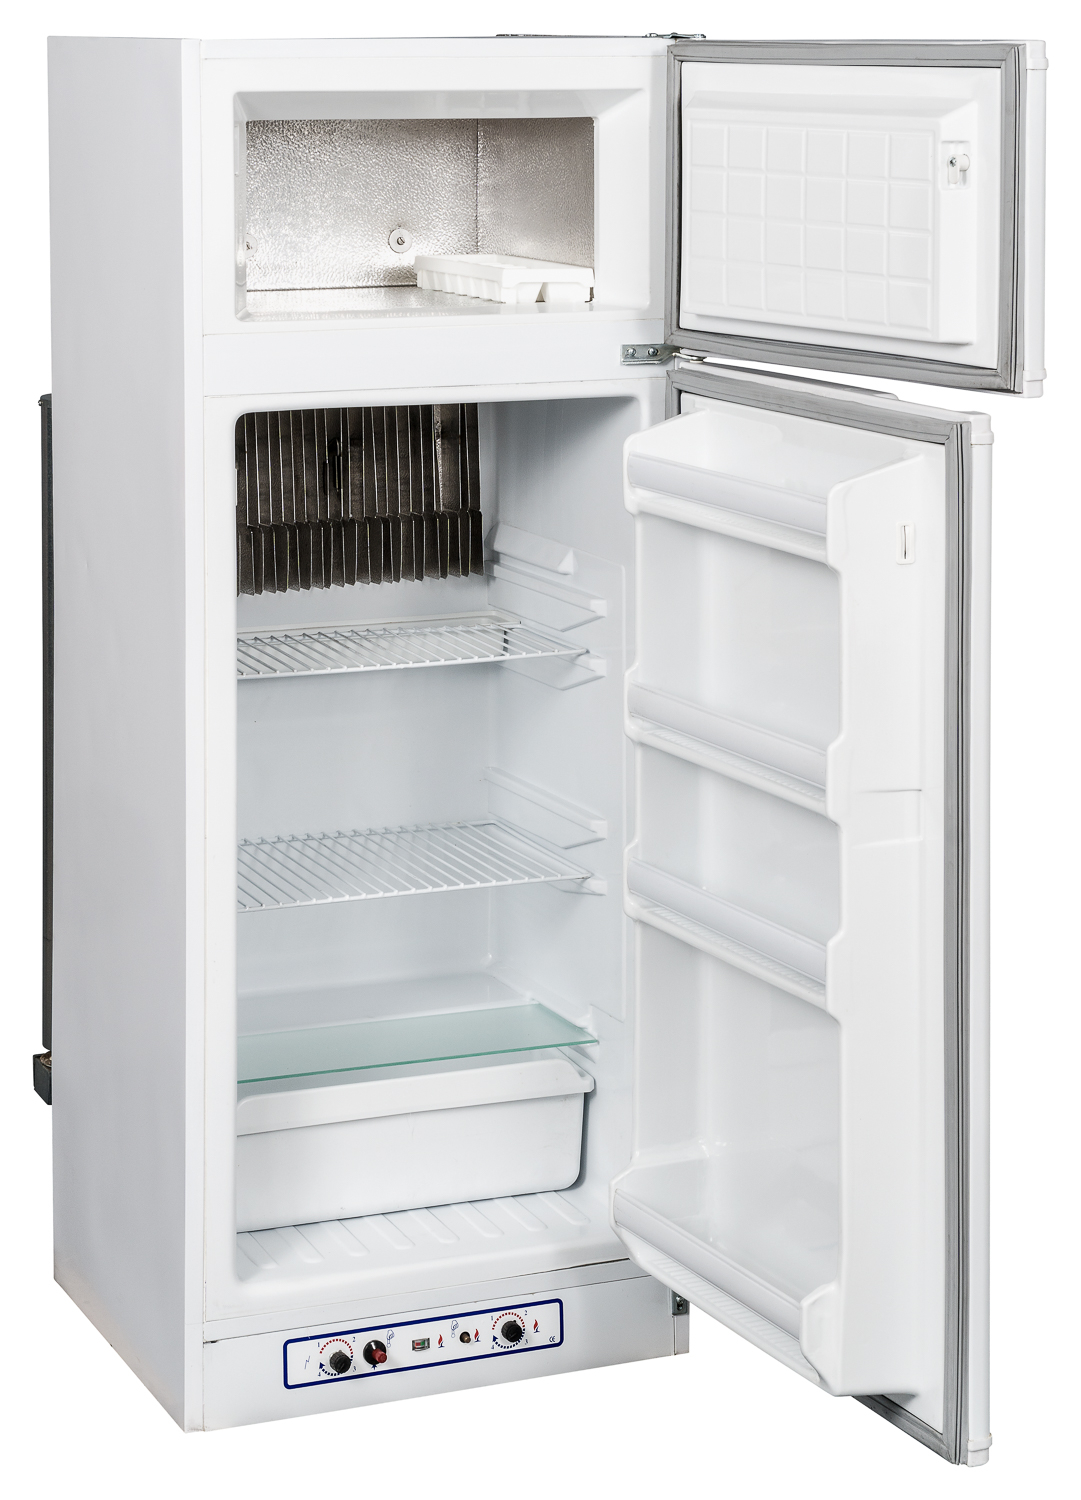 11 Refrigerator Household Appliances Pictures